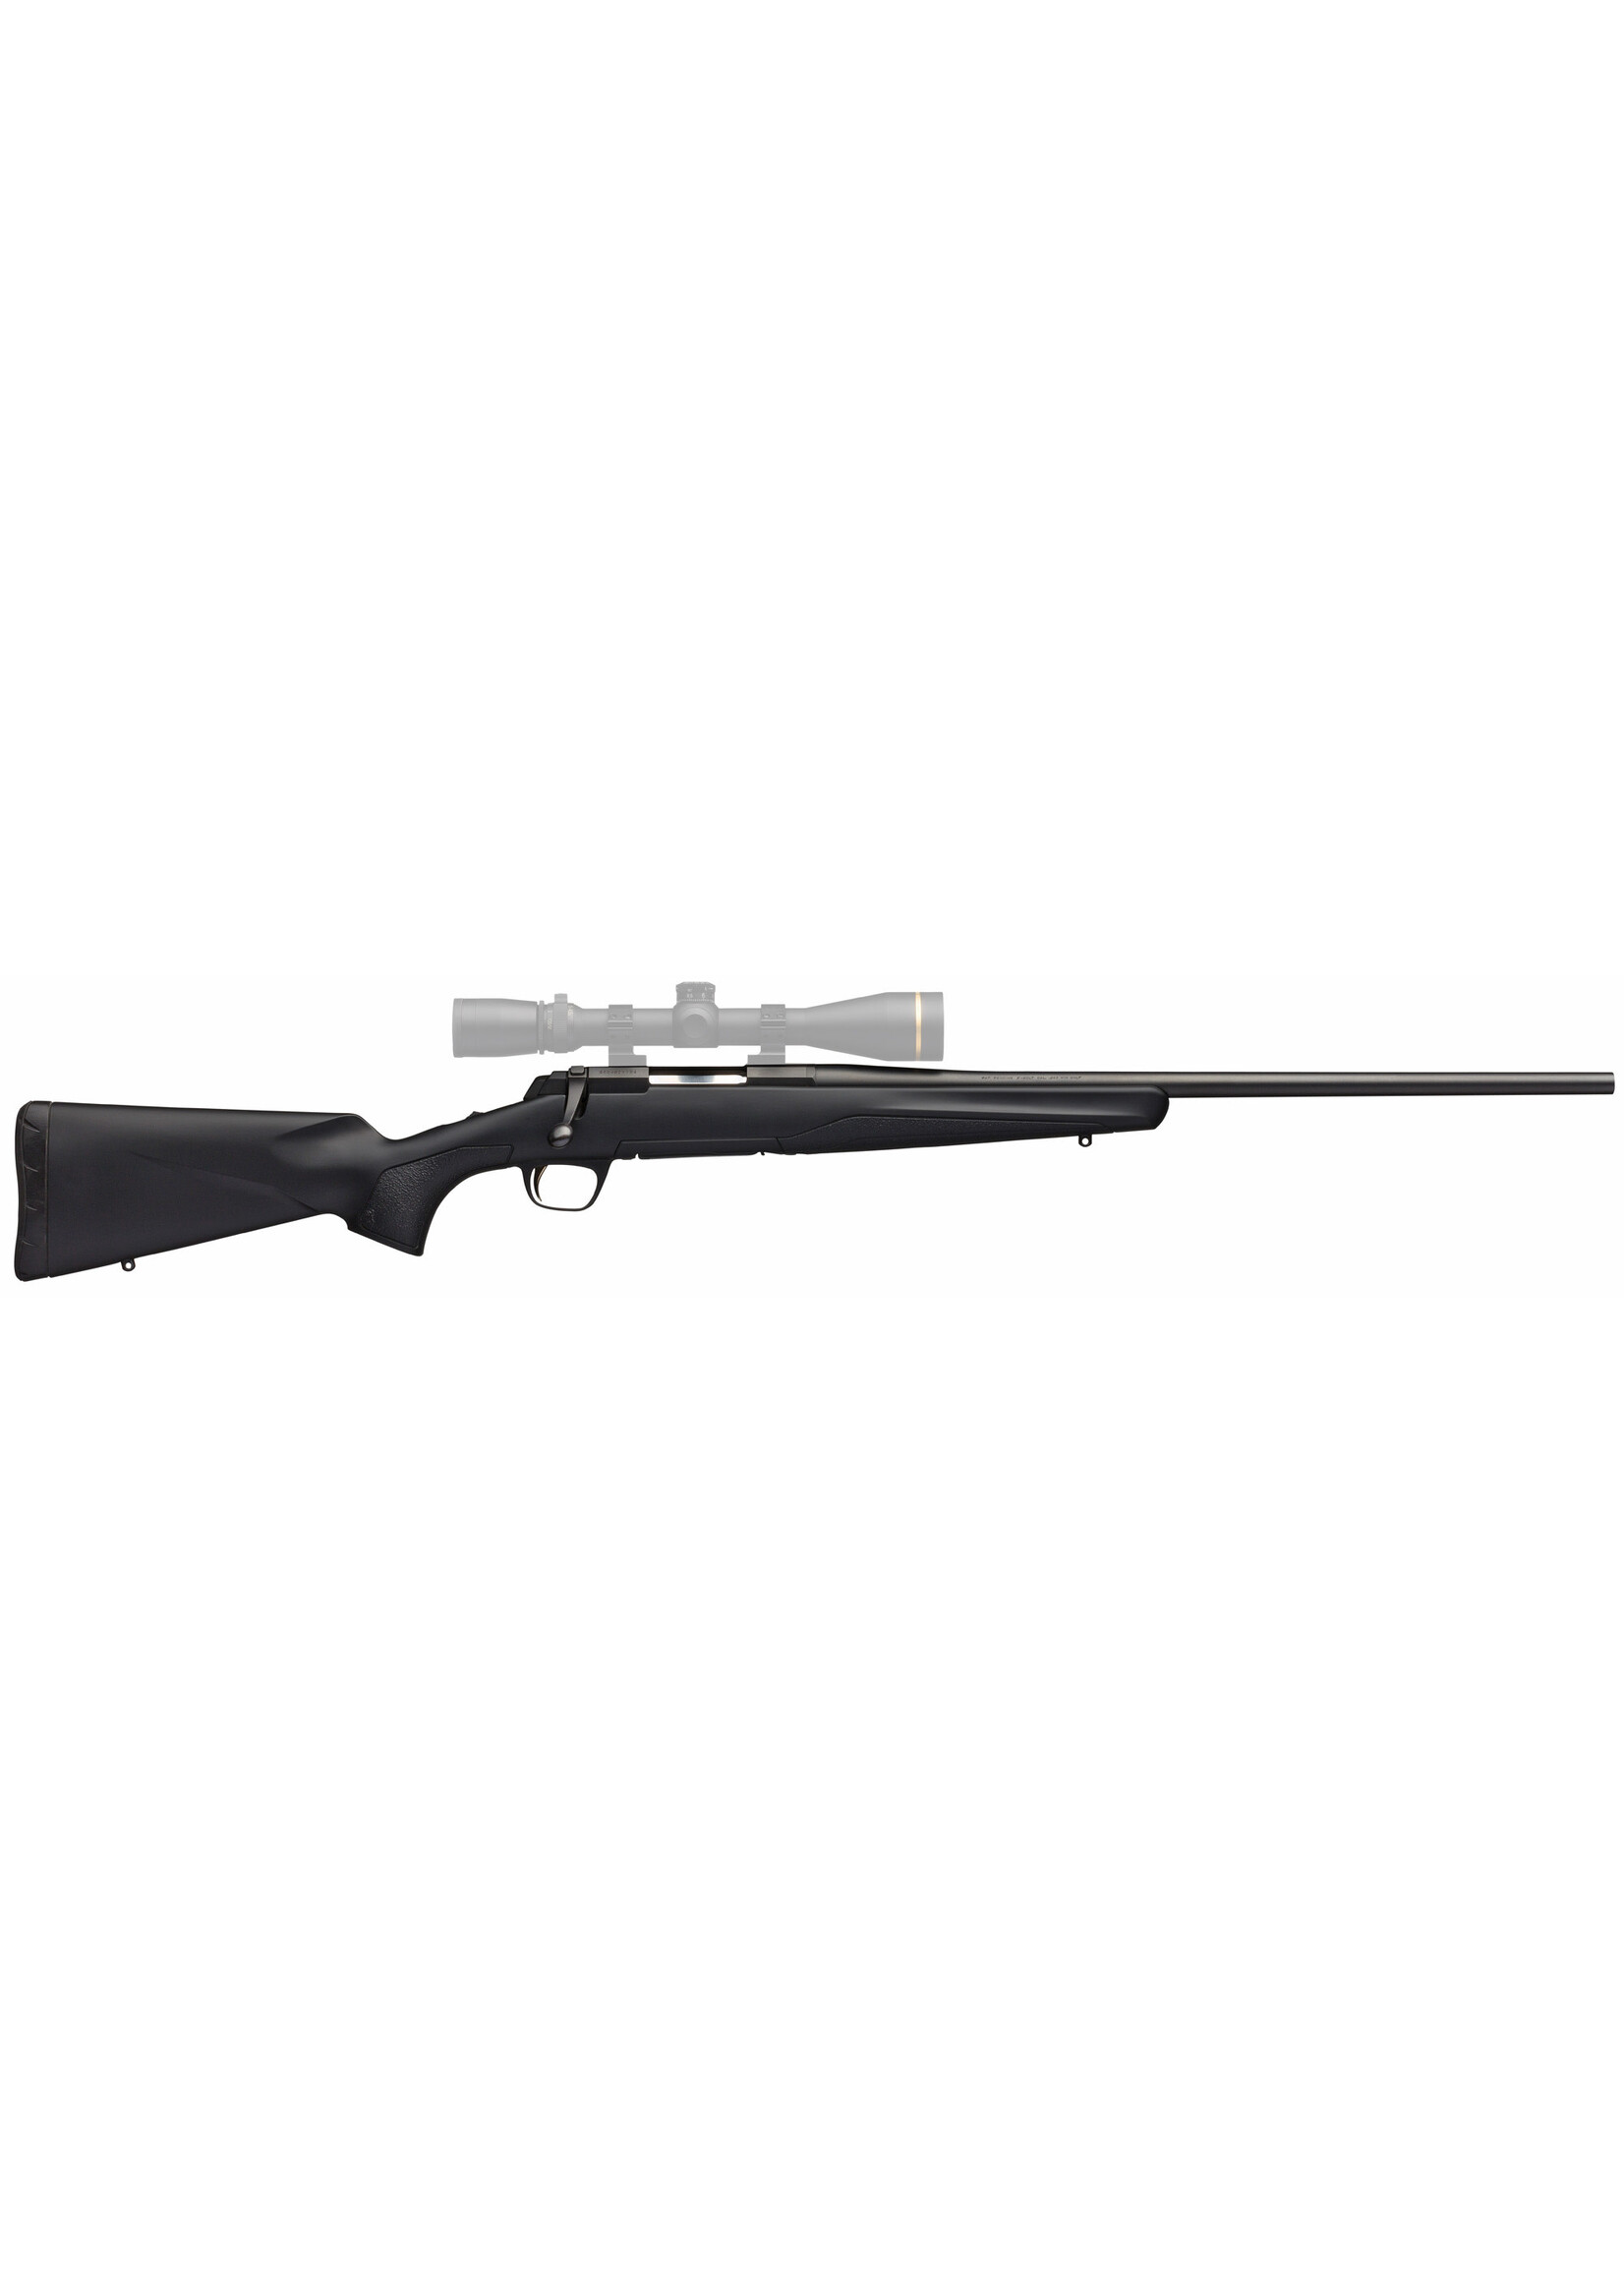 Browning Browning, X-Bolt, Stalker, Bolt Action Rifle, 30-06 Springfield, 22" Barrel, Blued Finish, Composite Stock, 4 Rounds, 1 Magazine